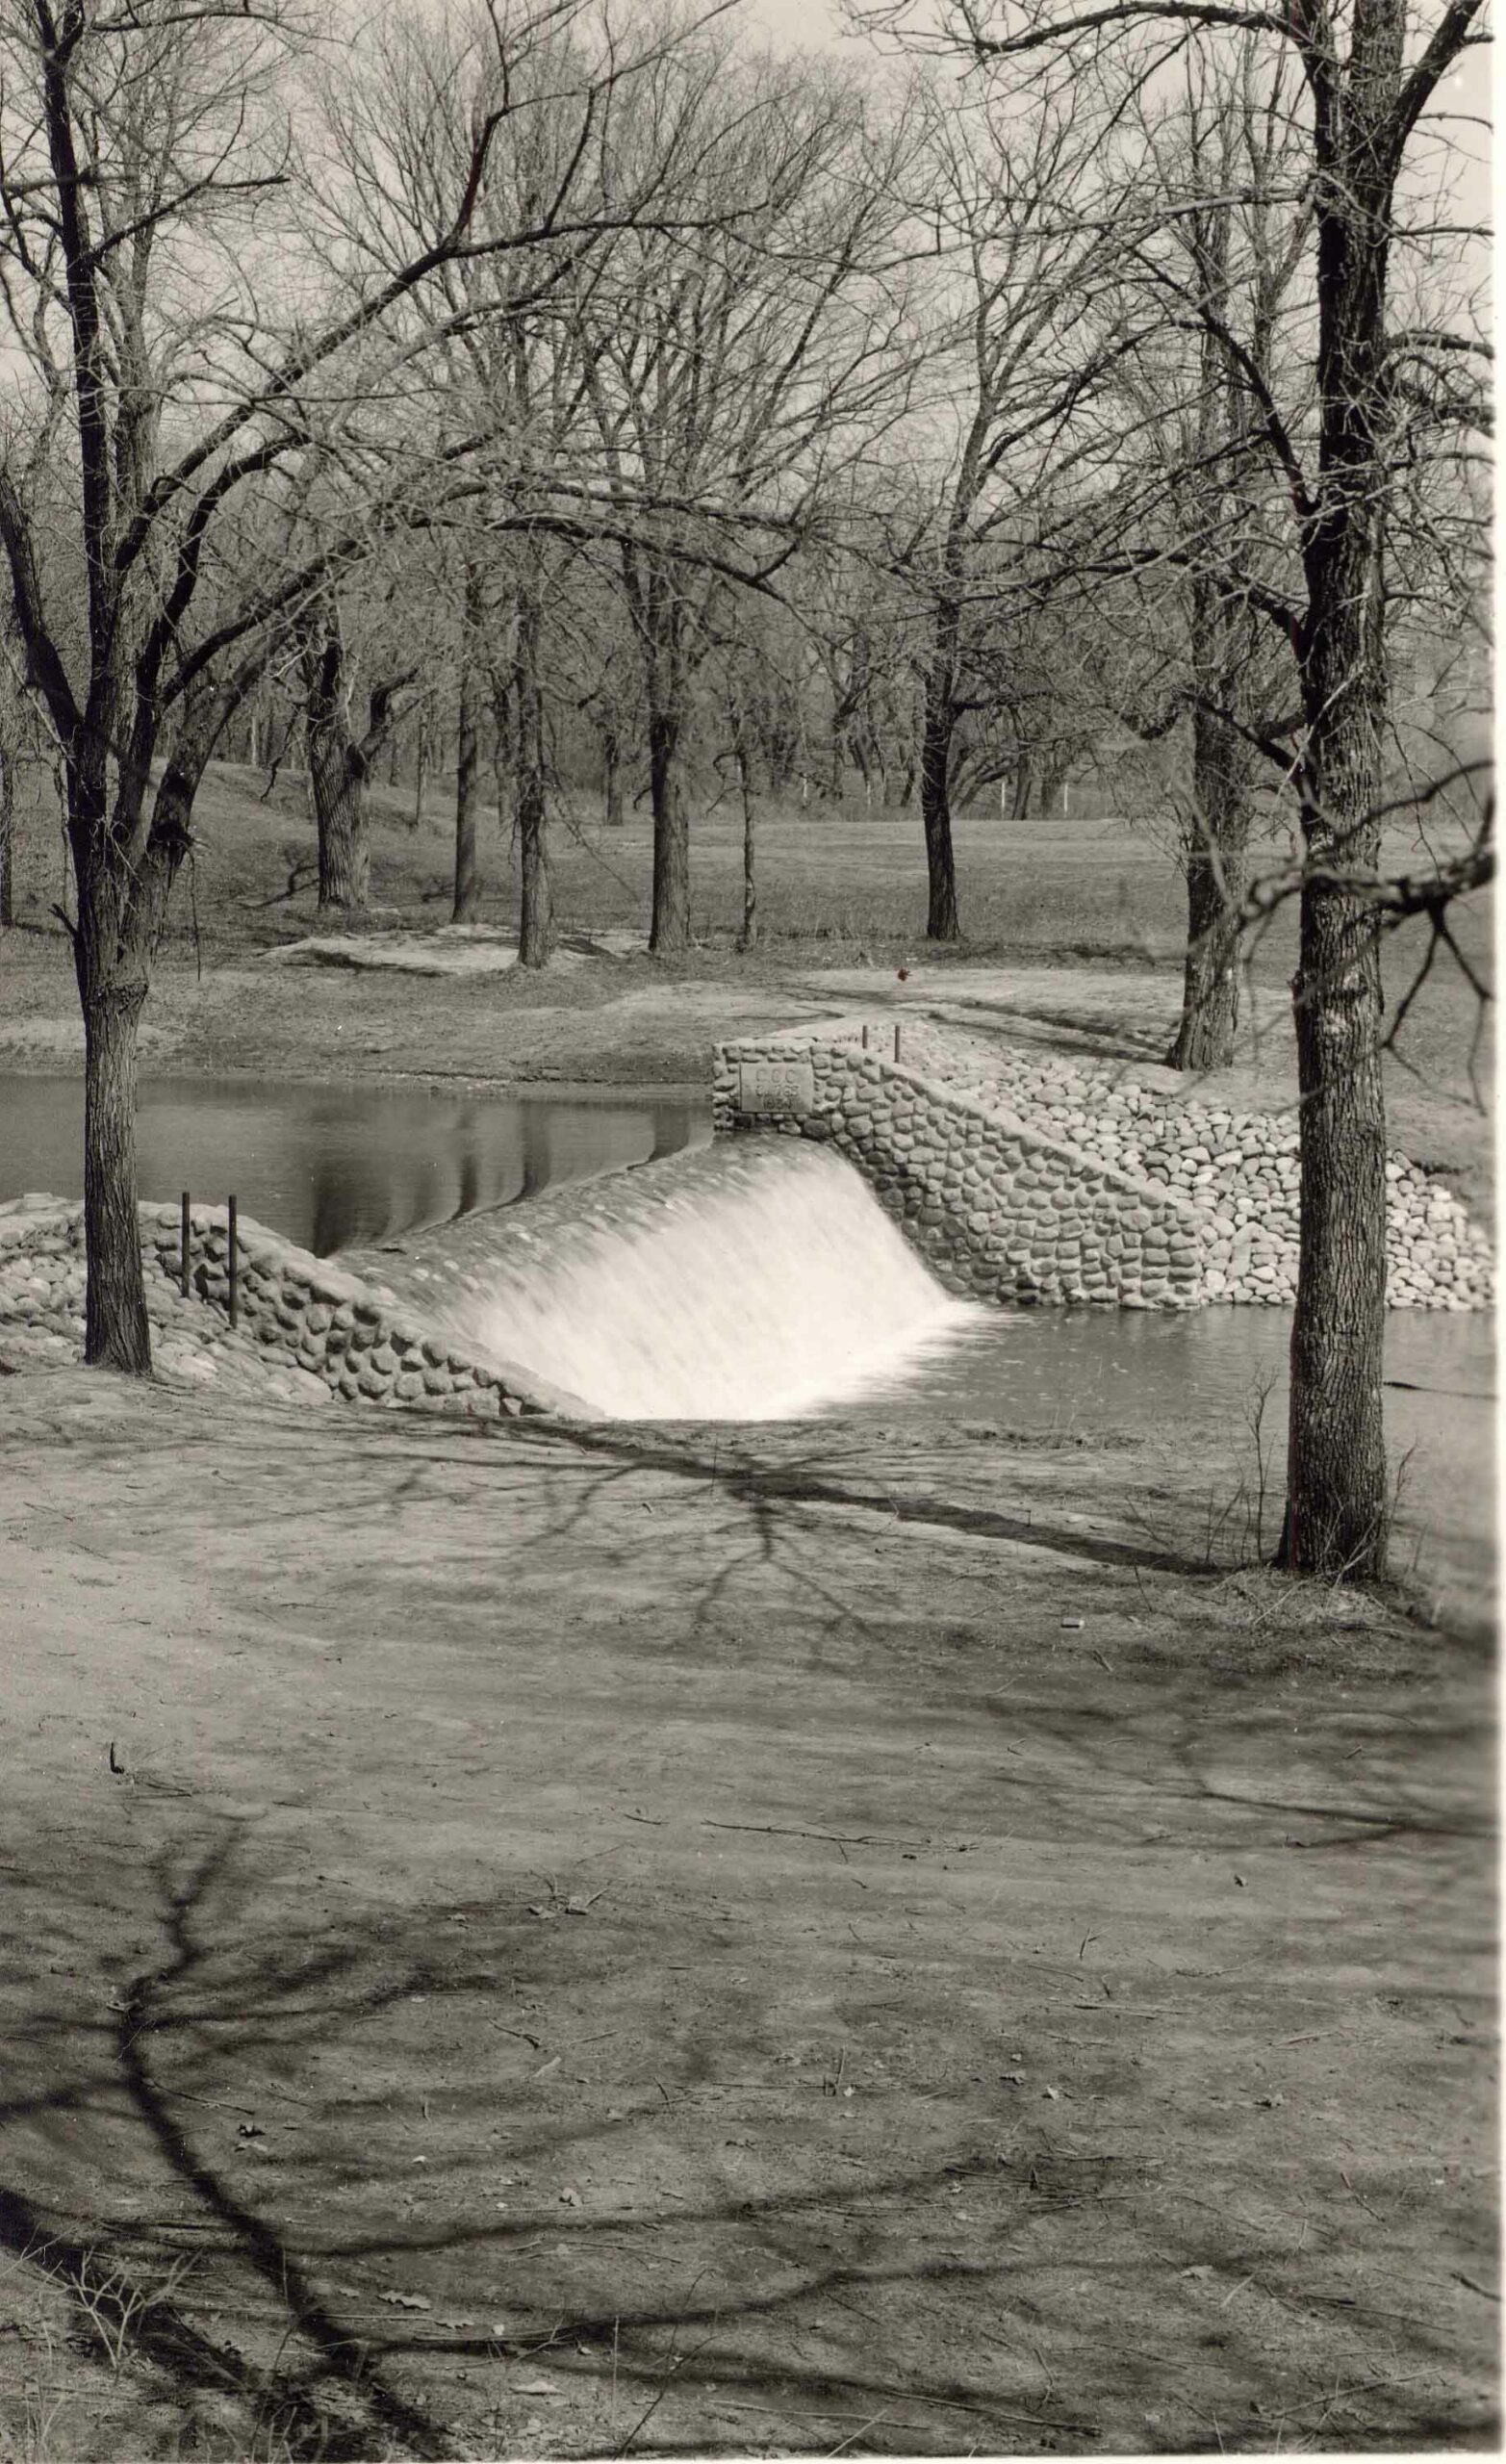 The Old CCC Dam When It Wasn't So Old